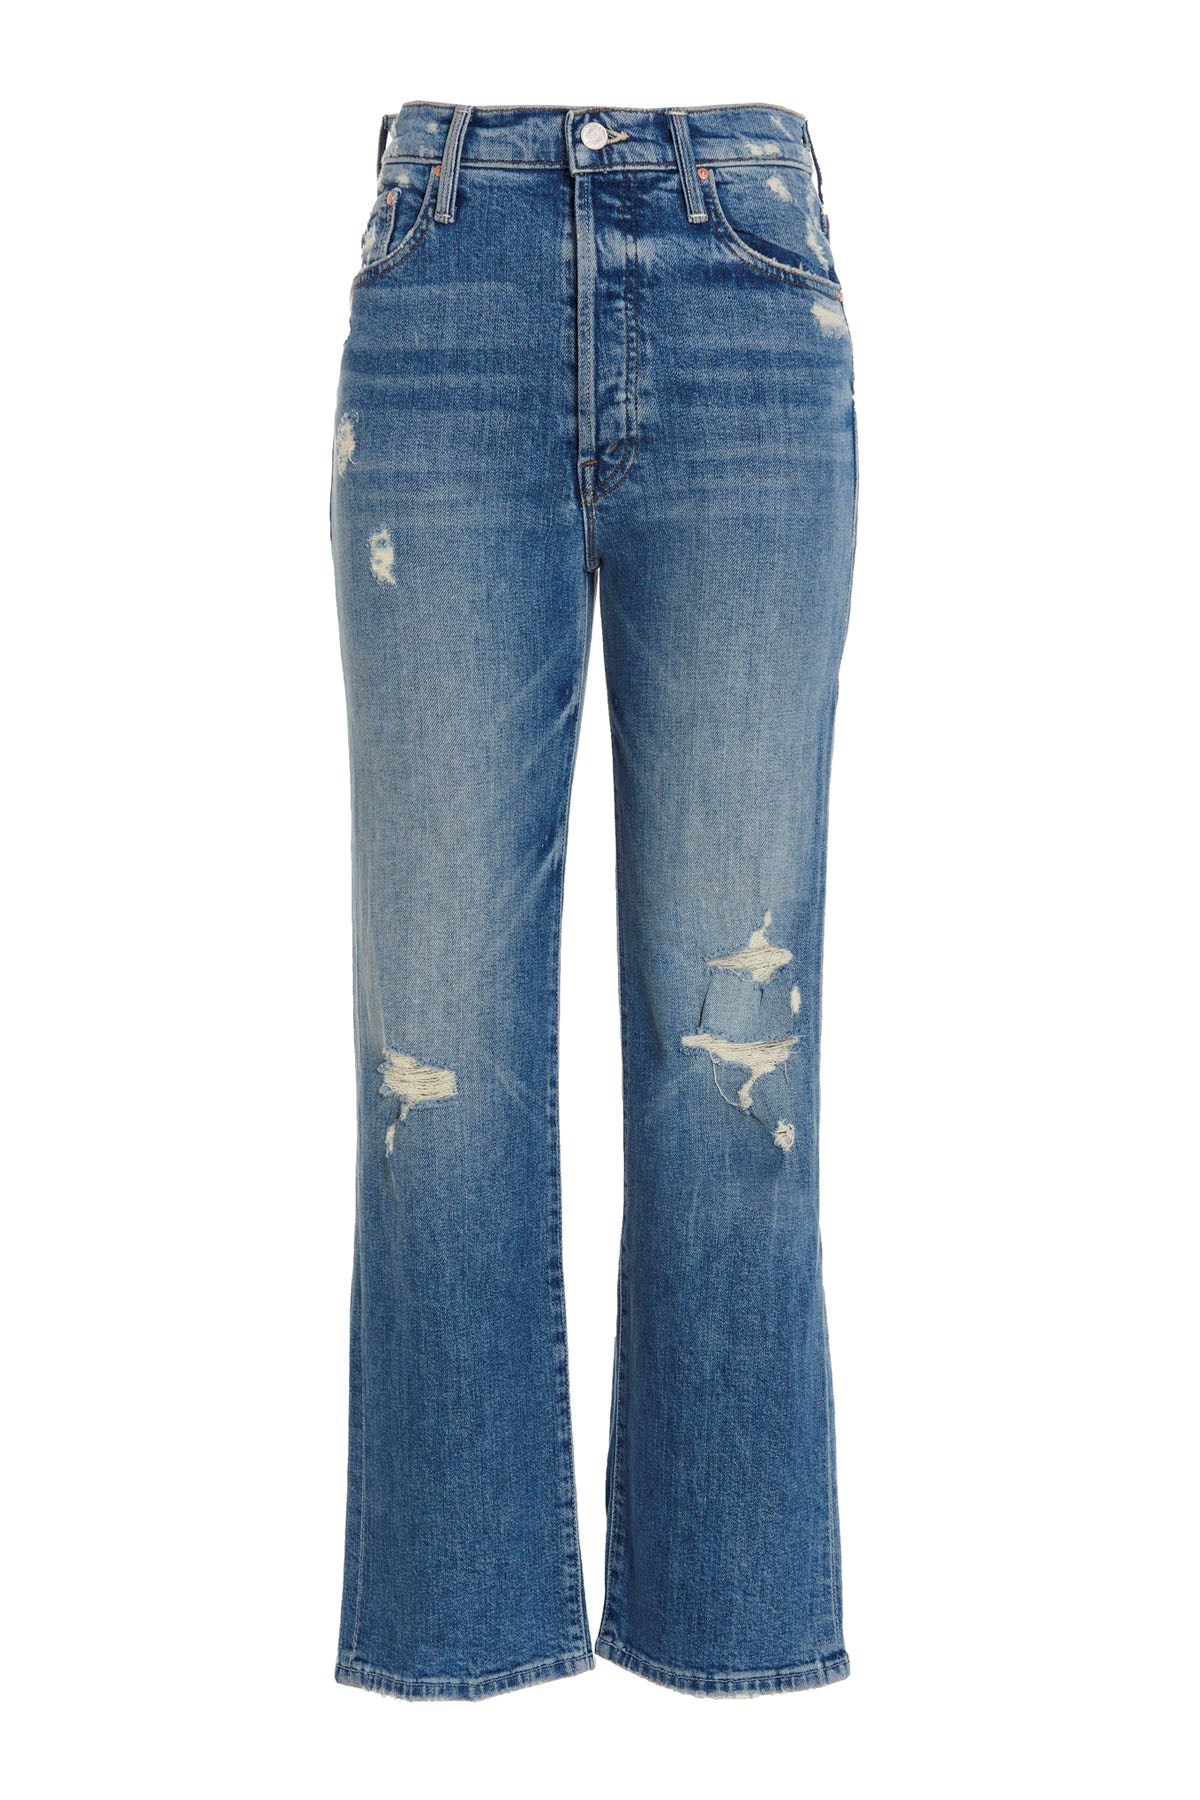 MOTHER 'The Rambler' Jeans